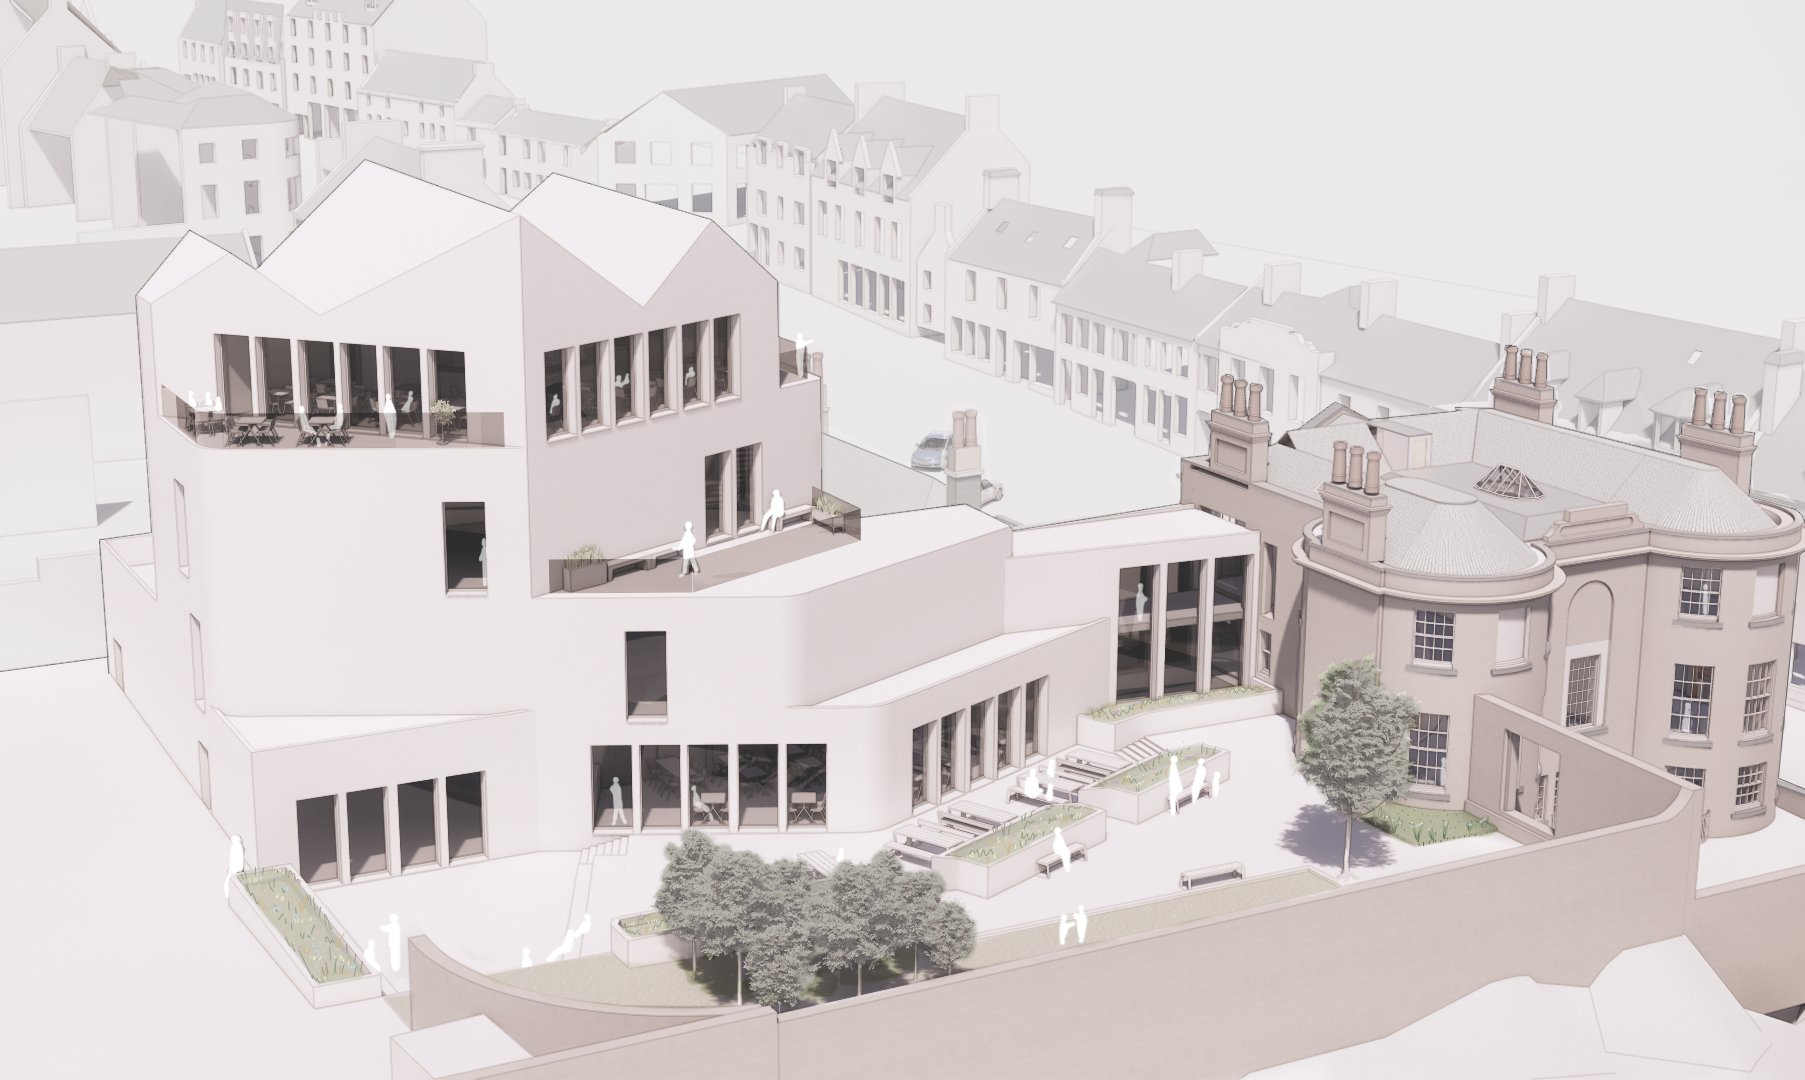 Initial designs unveiled for £20m Peterhead museum and library